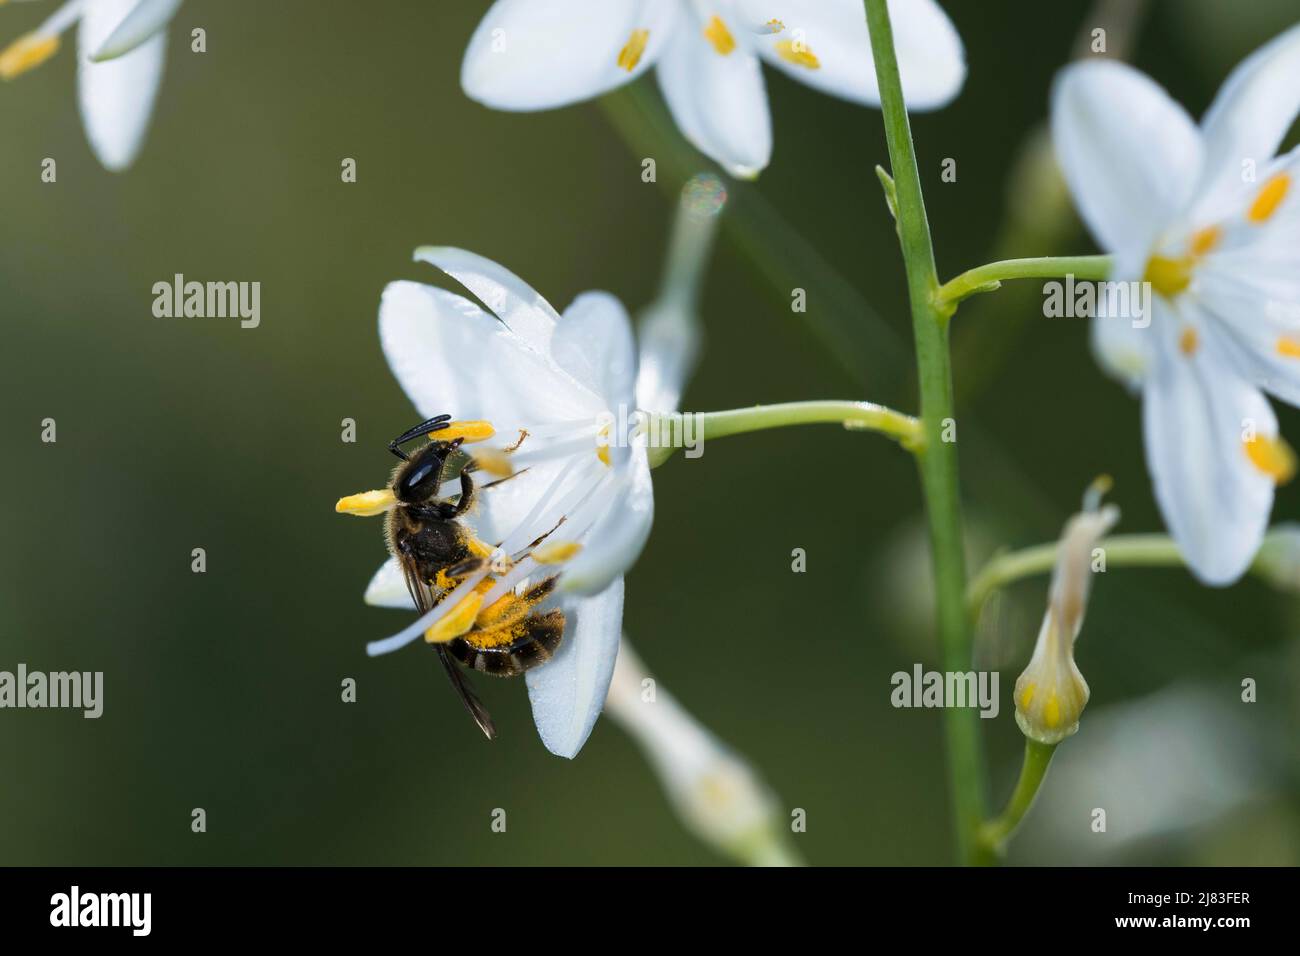 Sweat bee (Halictus) bites open anthers with pollen of the branchial grass lily (Anthericum ramosum), Solothurn, Switzerland-205935 Stock Photo